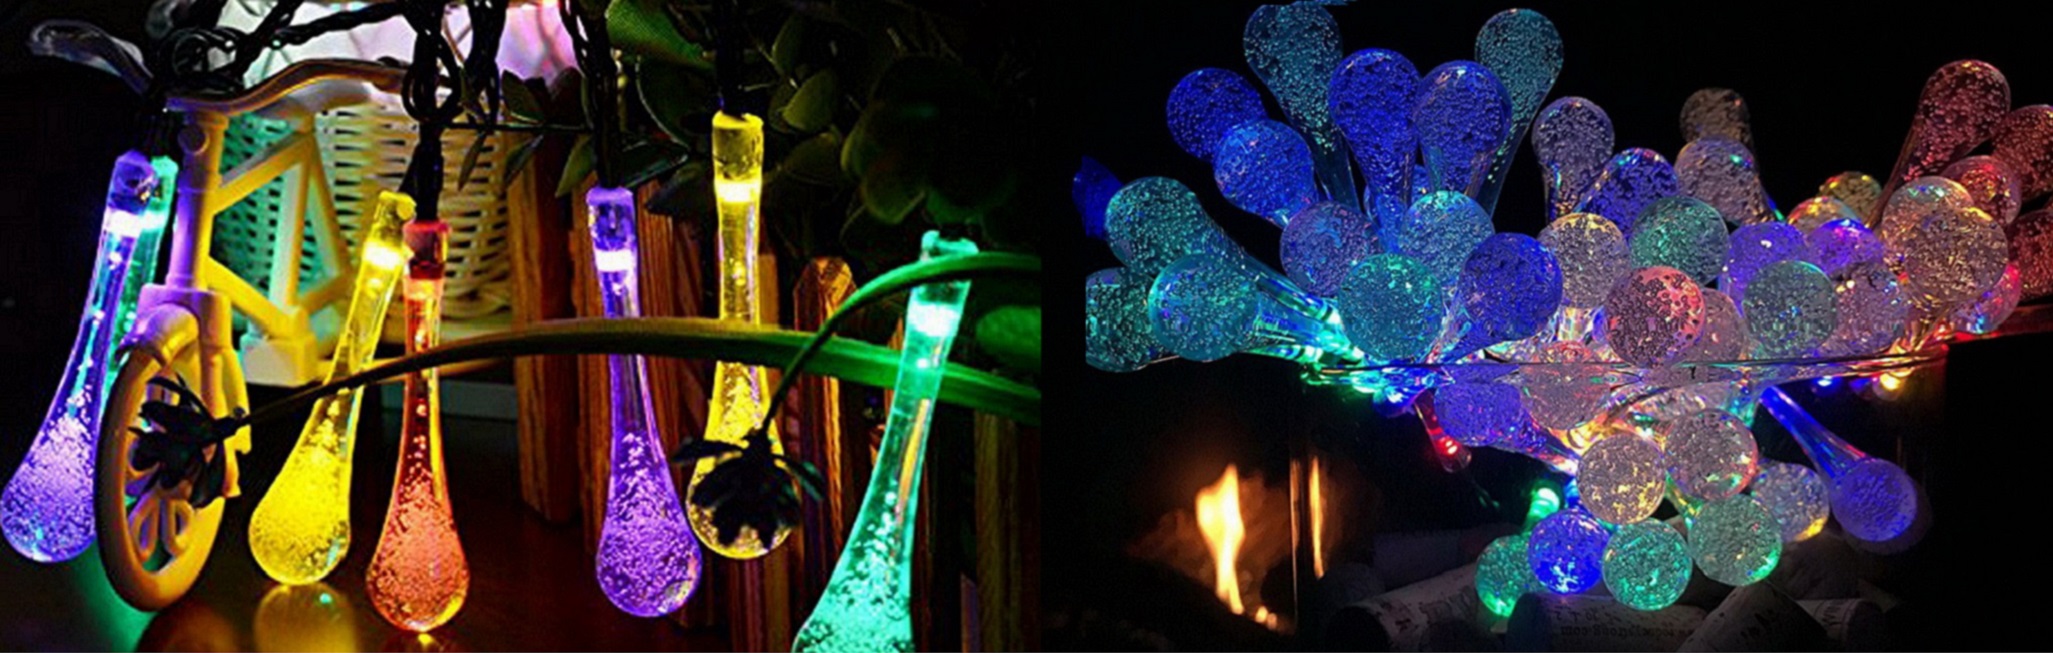 LED Outdoor Water Drop Solar String Lights